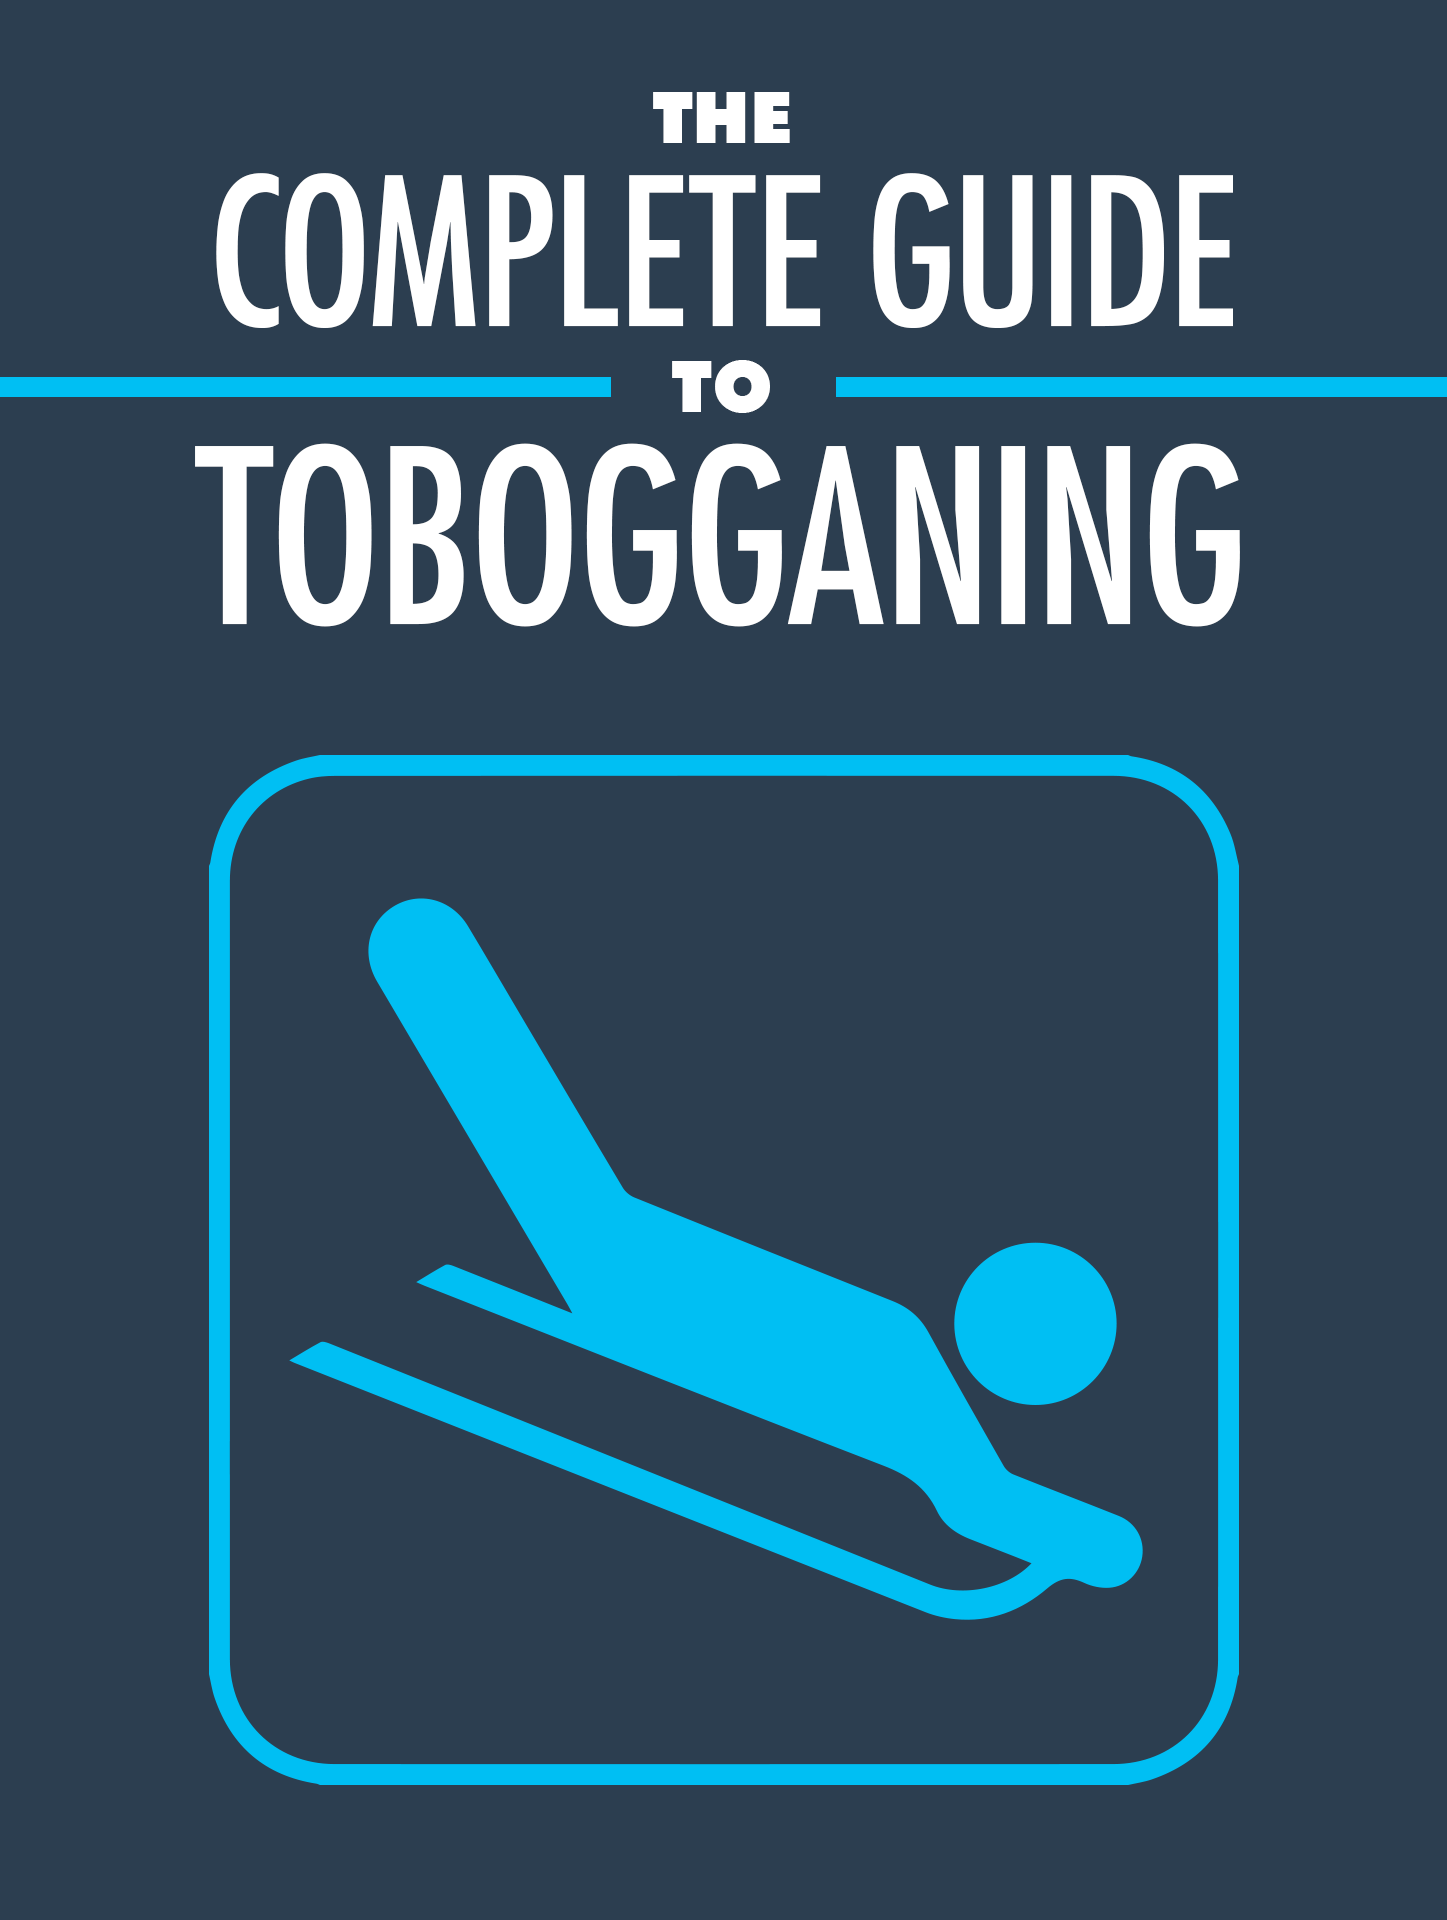 The Complete Guide to Tobogganing